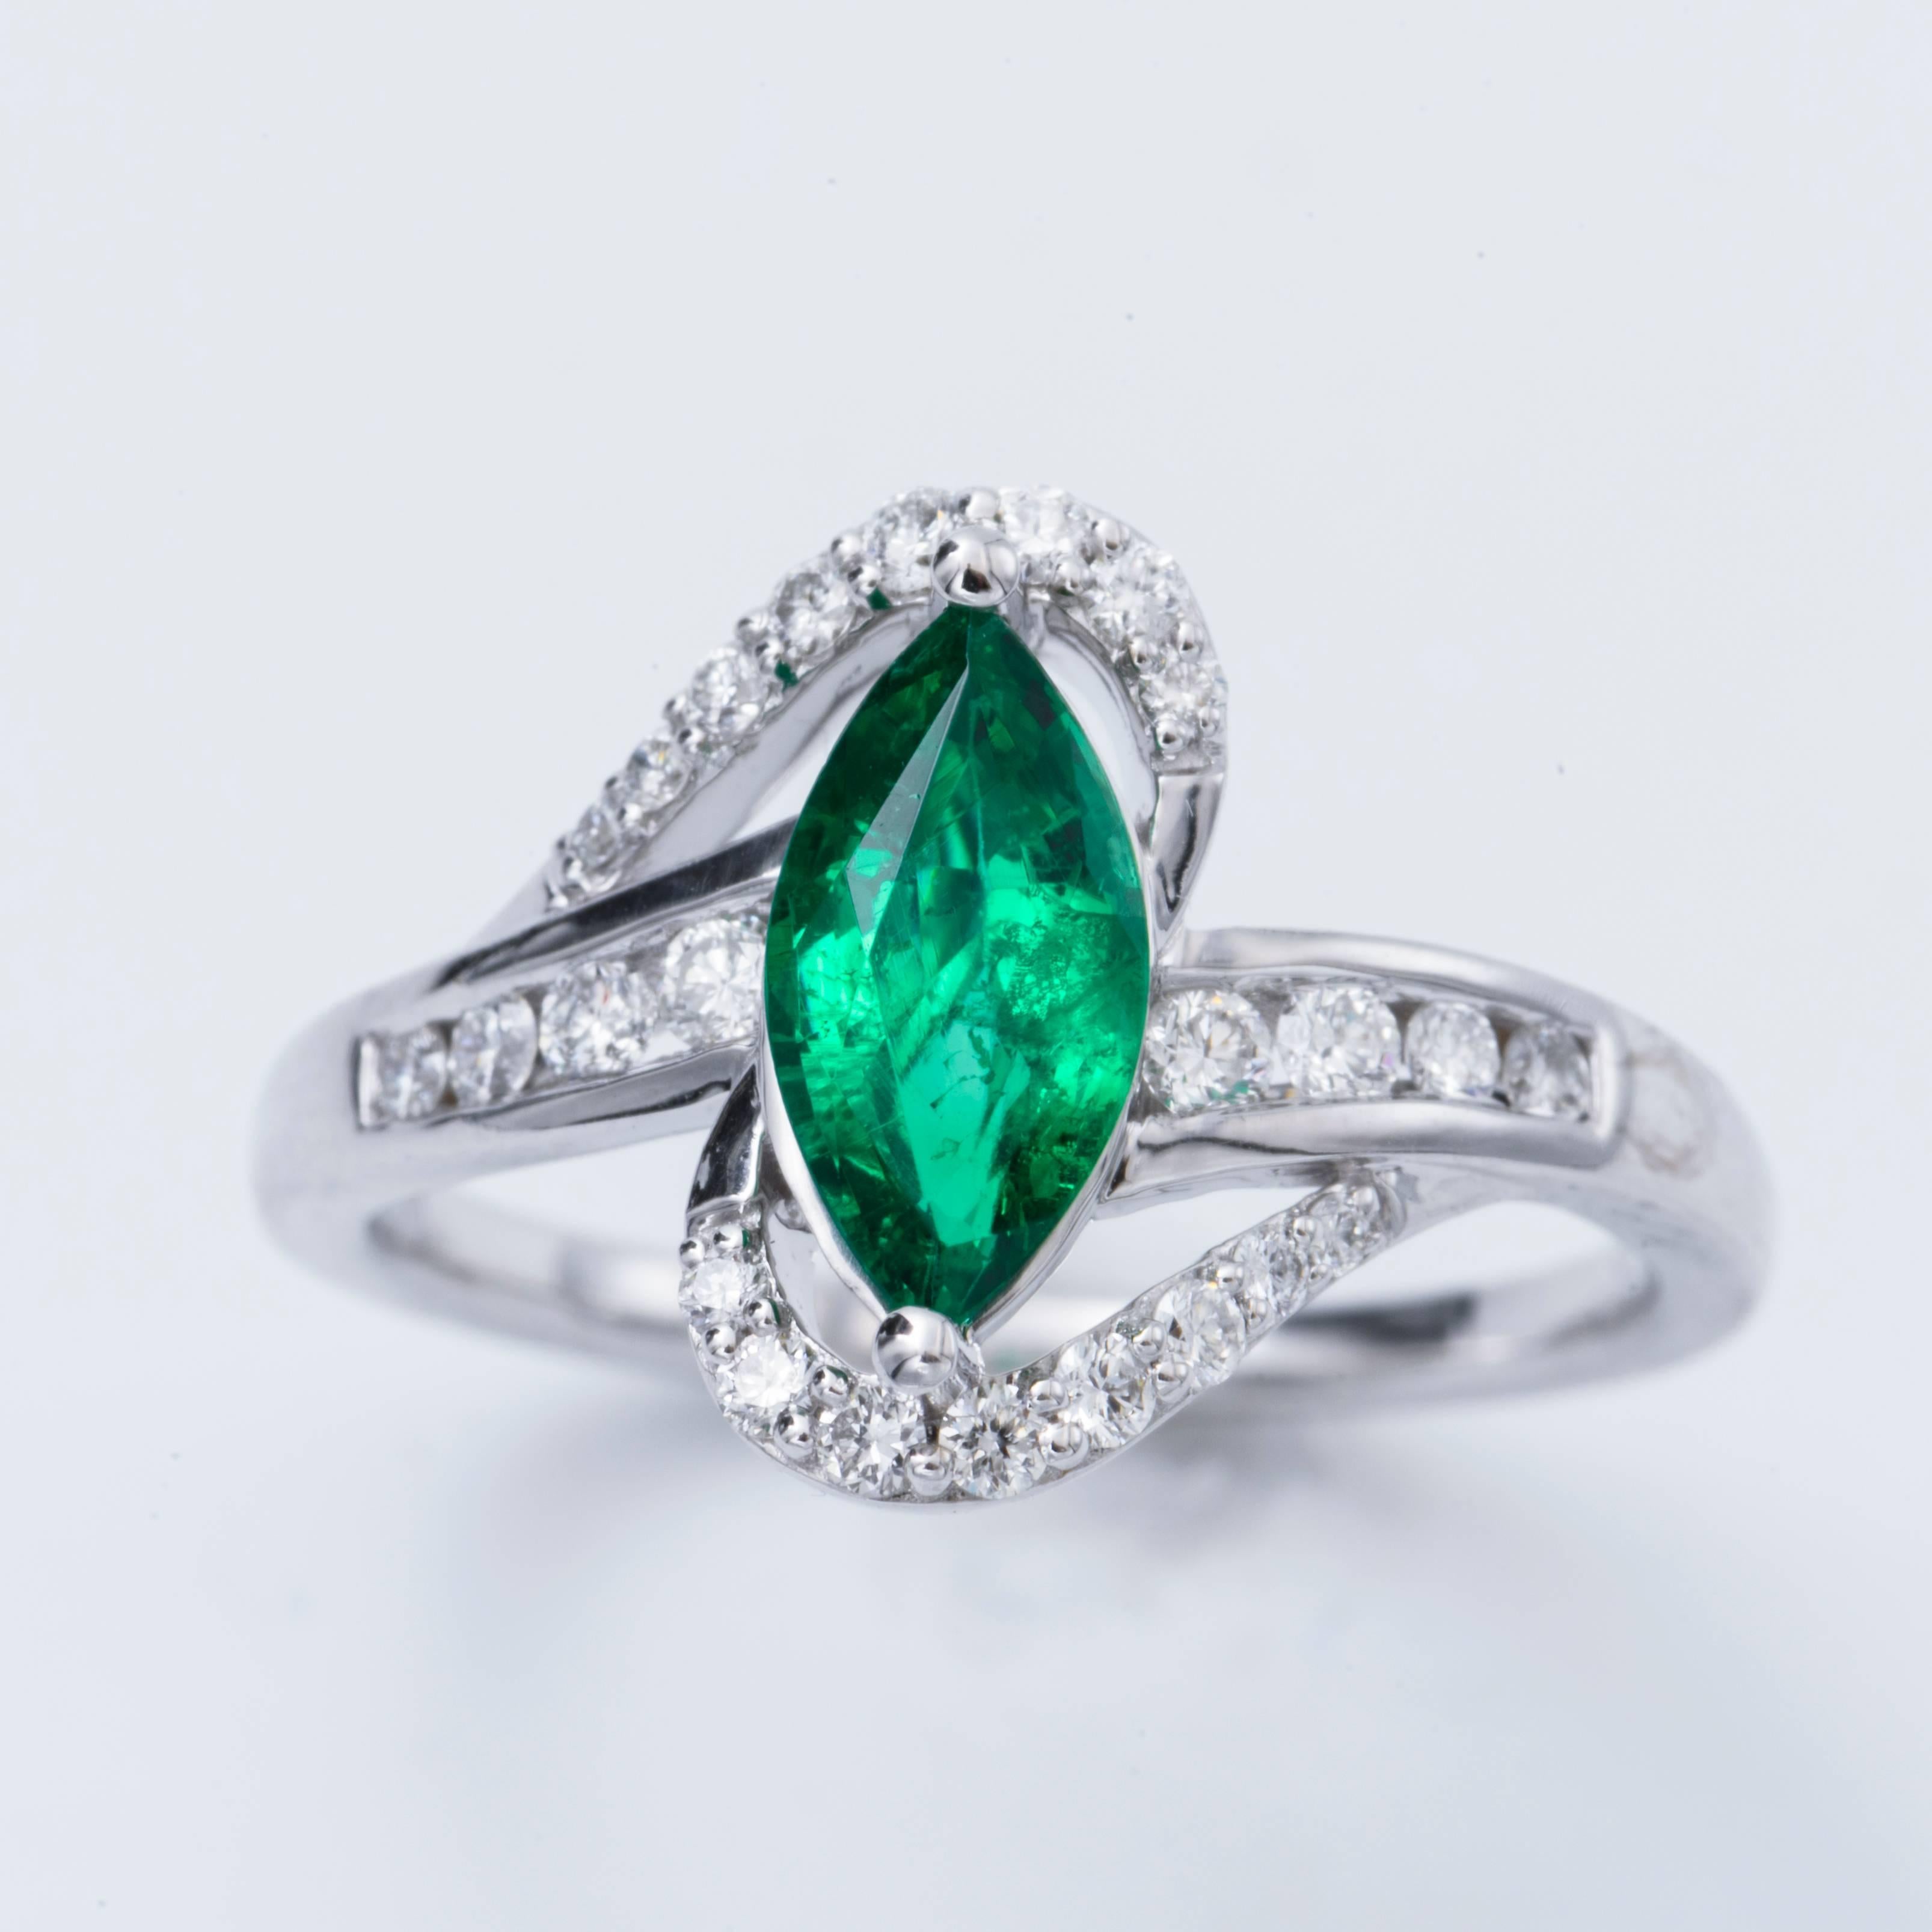 14K  White Gold with Marquise Zambian Emerald measuring 9x4.5 mm and weights 0.85 cts. The  Diamonds weight is 0.34 cts Color: H Clarity SI in clarity